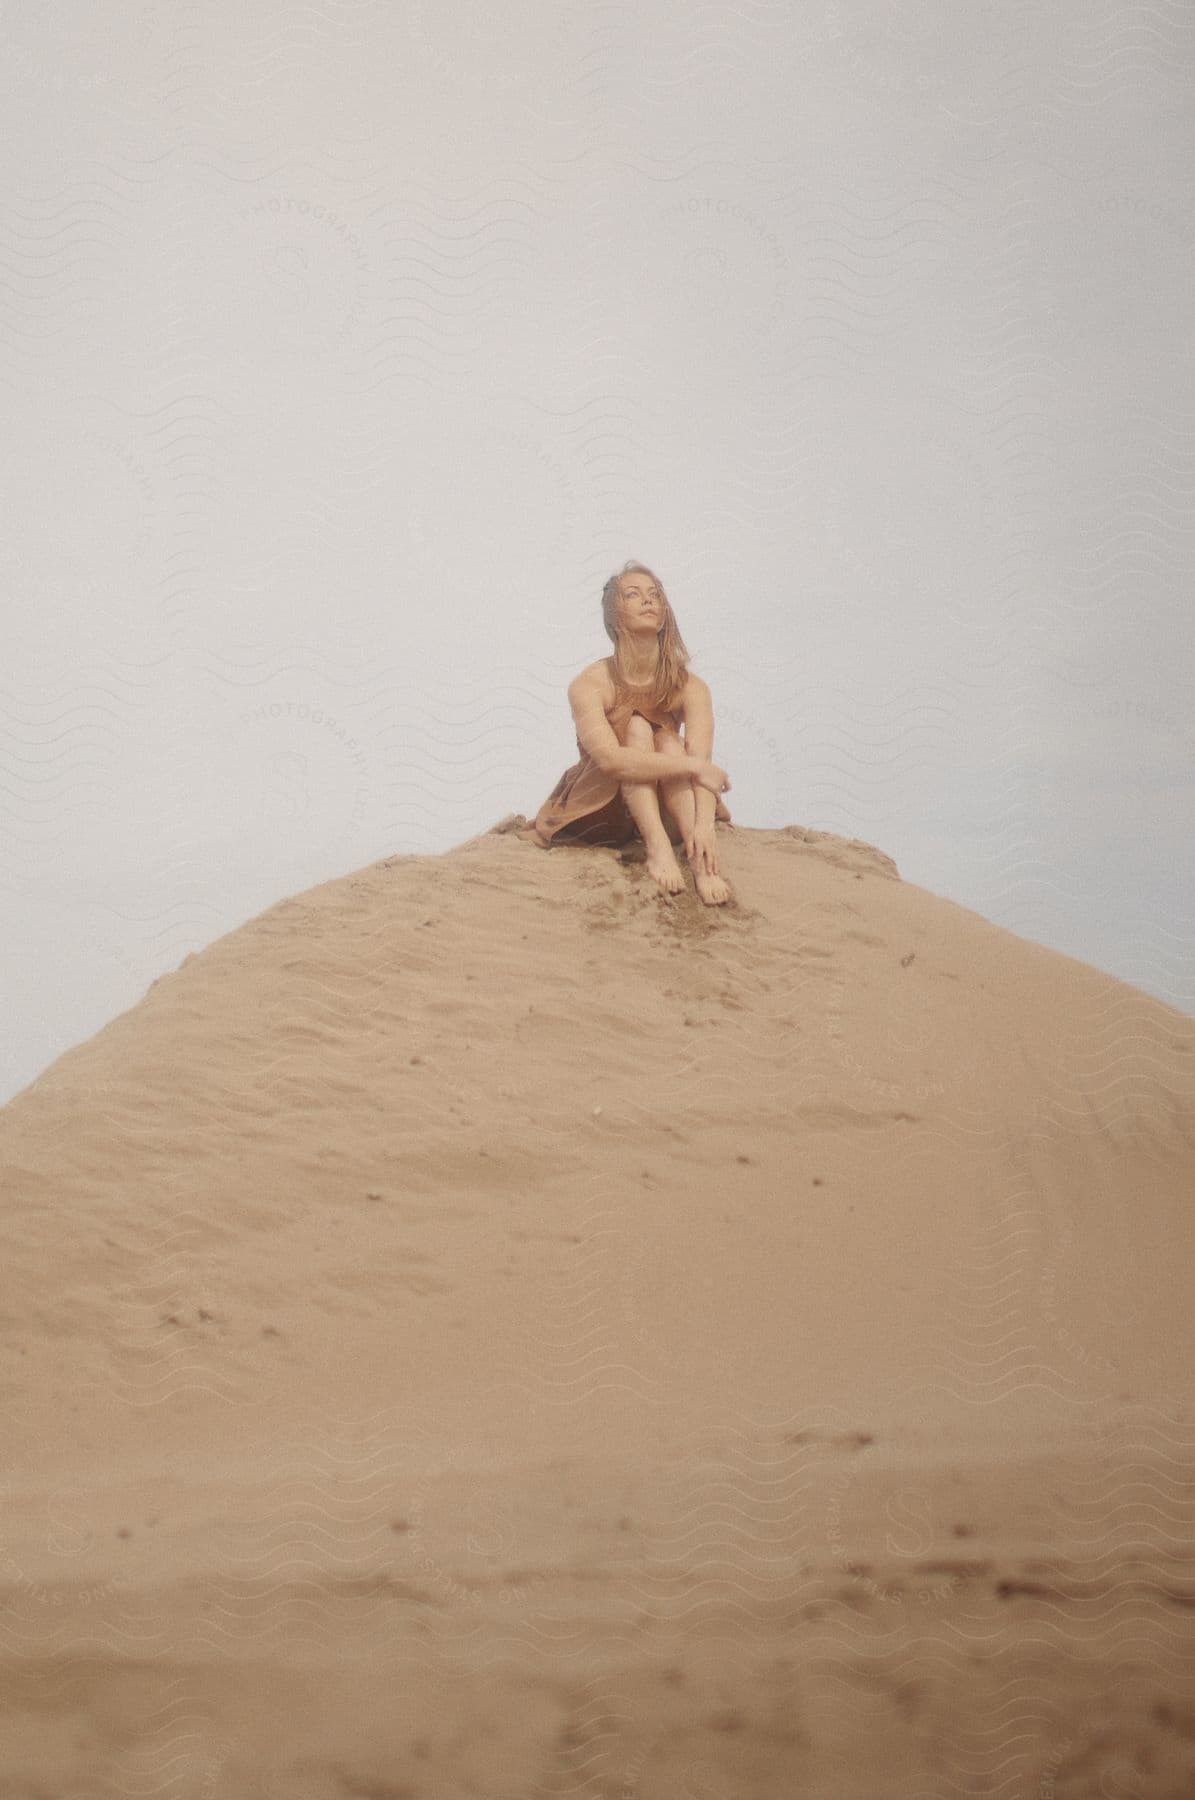 A woman sits barefoot upon a sand dune outdoors during the day